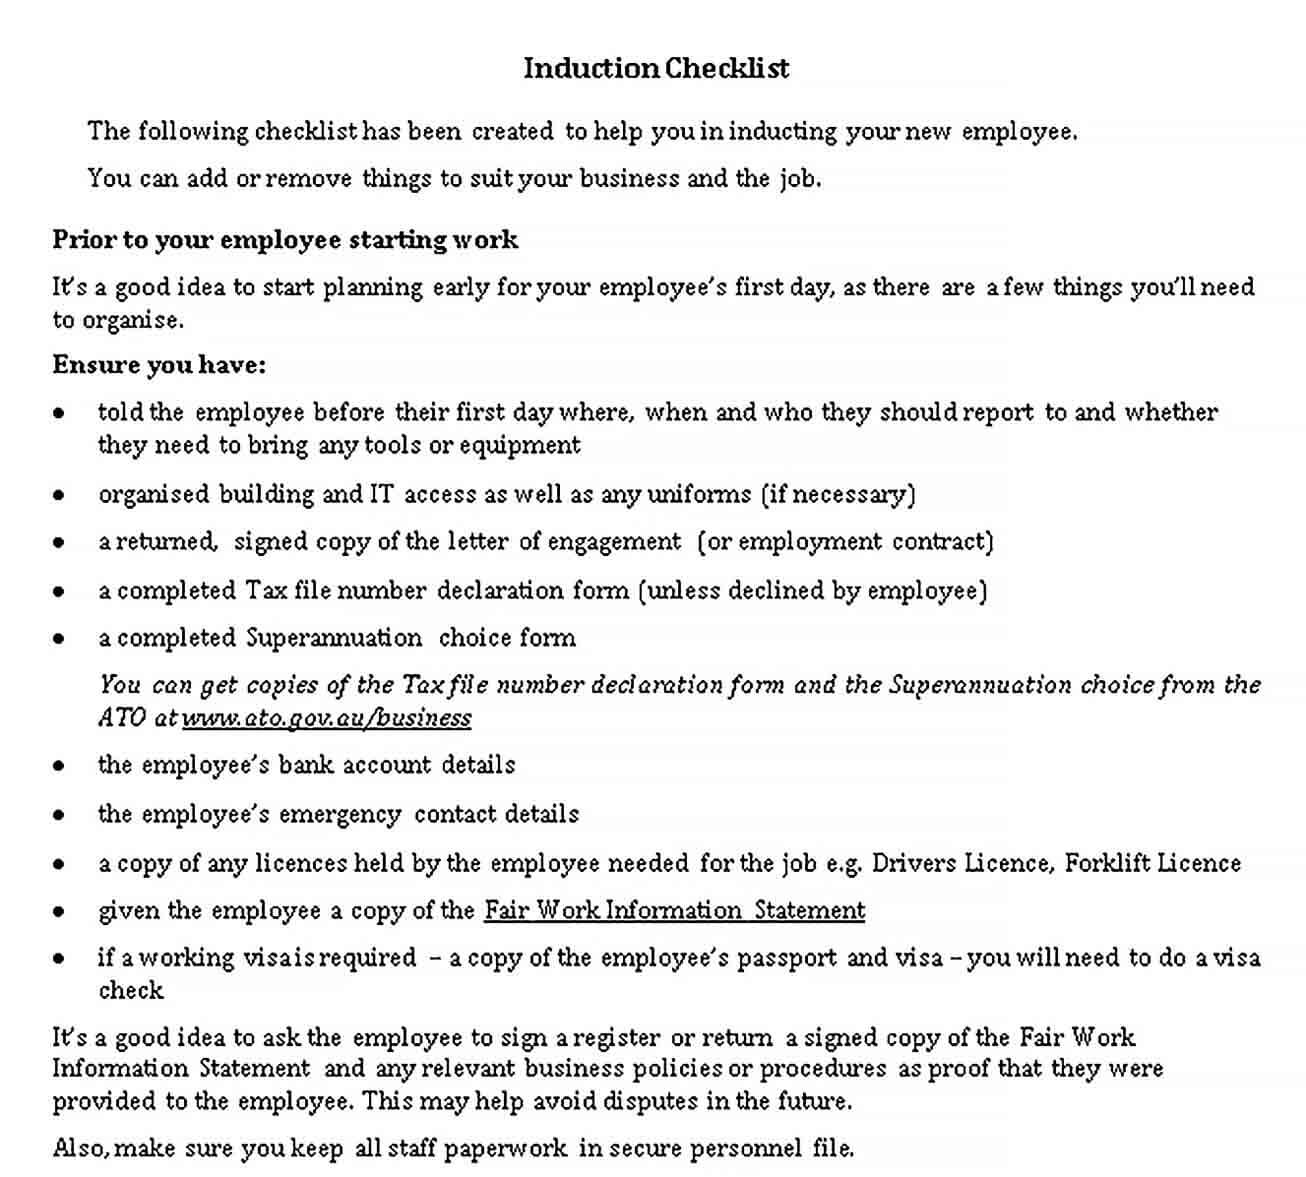 Sample New Employee Induction Checklist Template